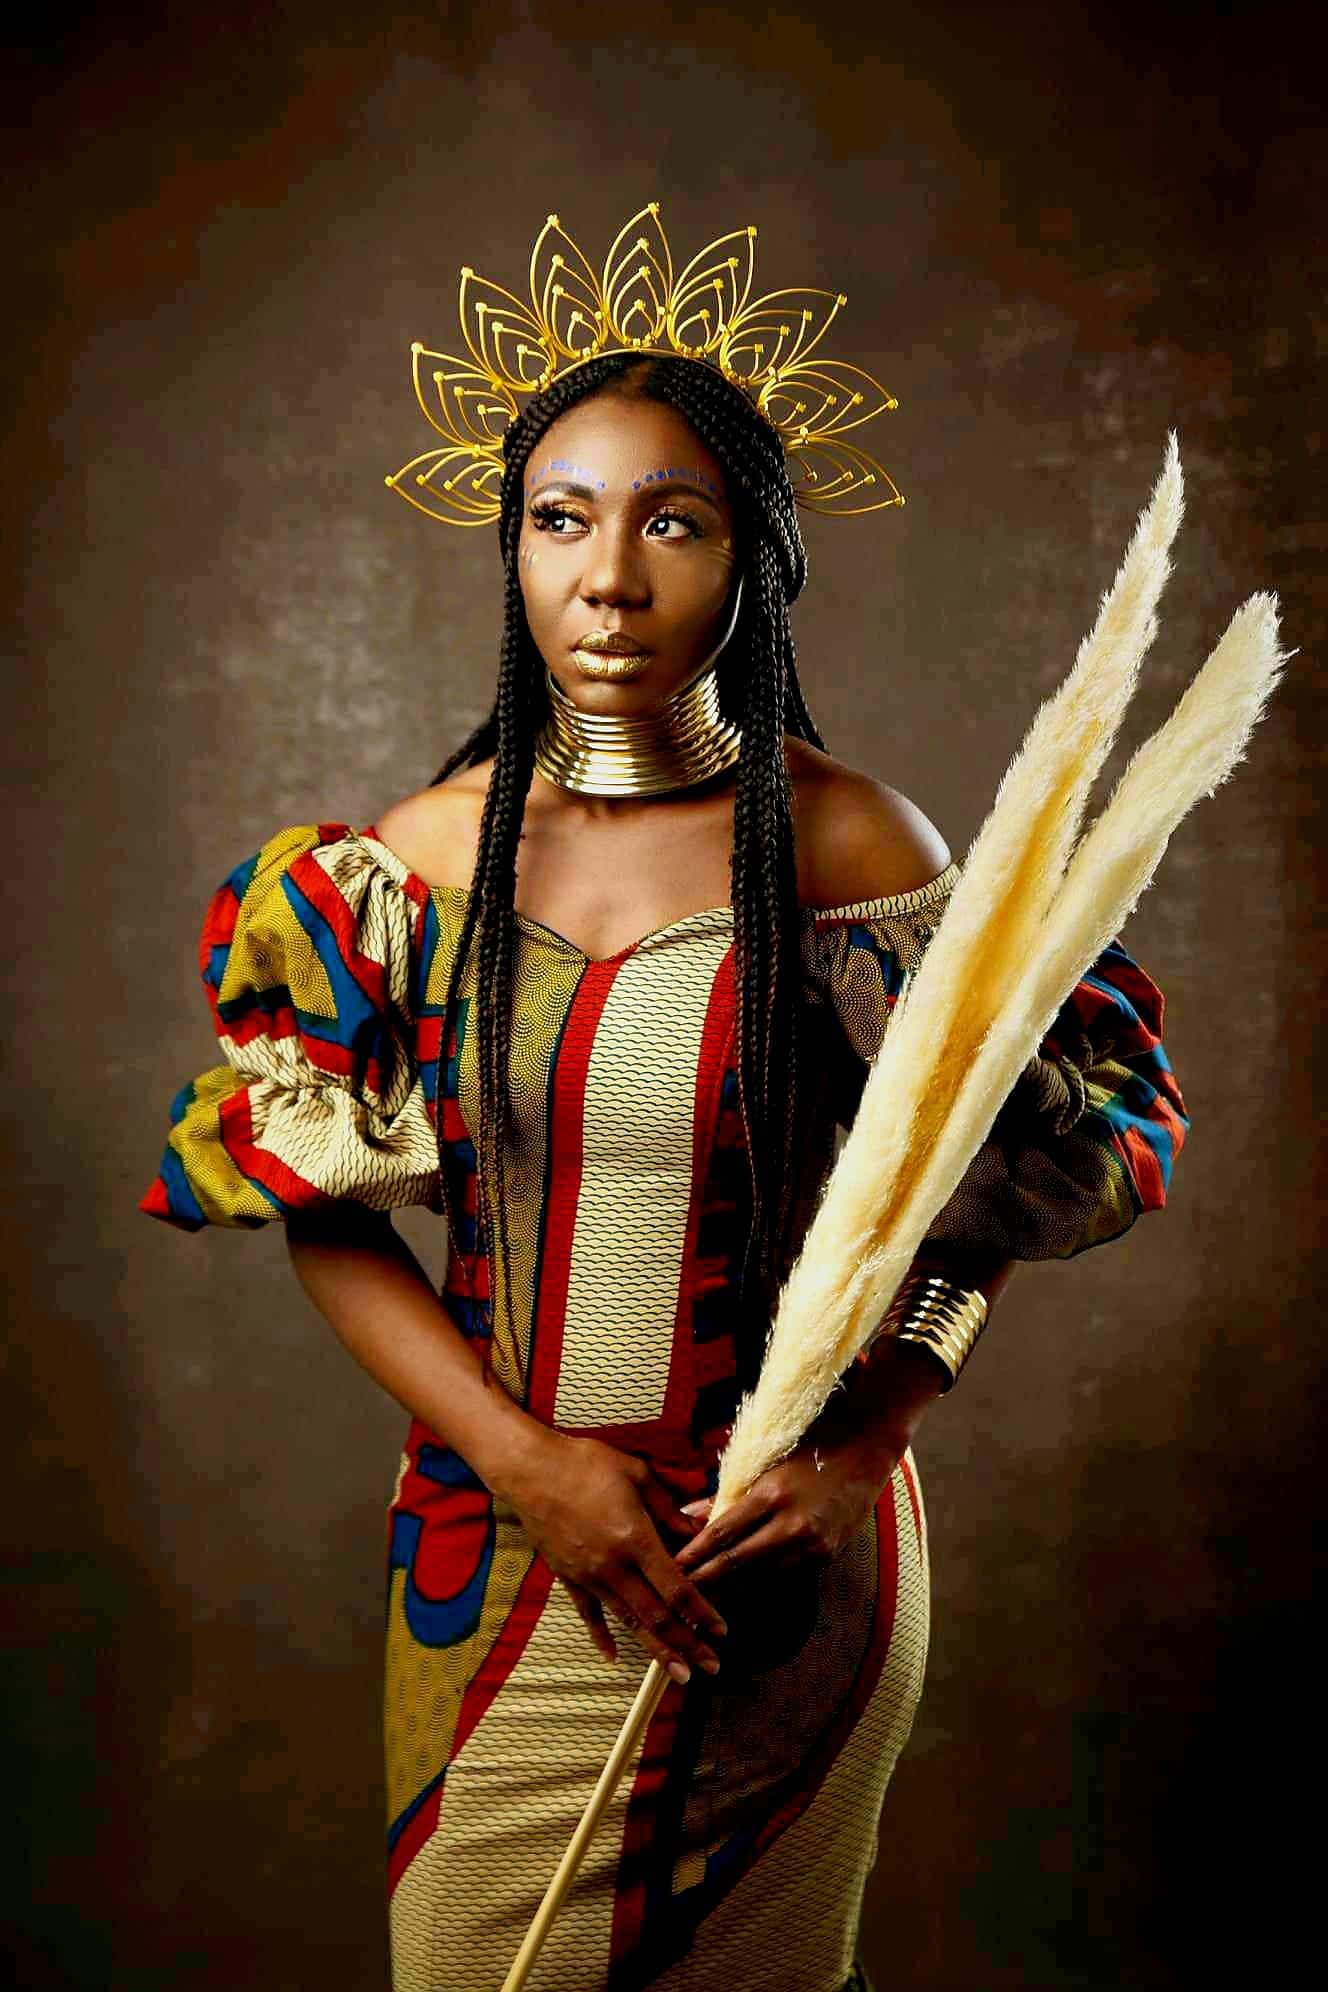 A Black woman wears African-inspired clothing and a gold crown